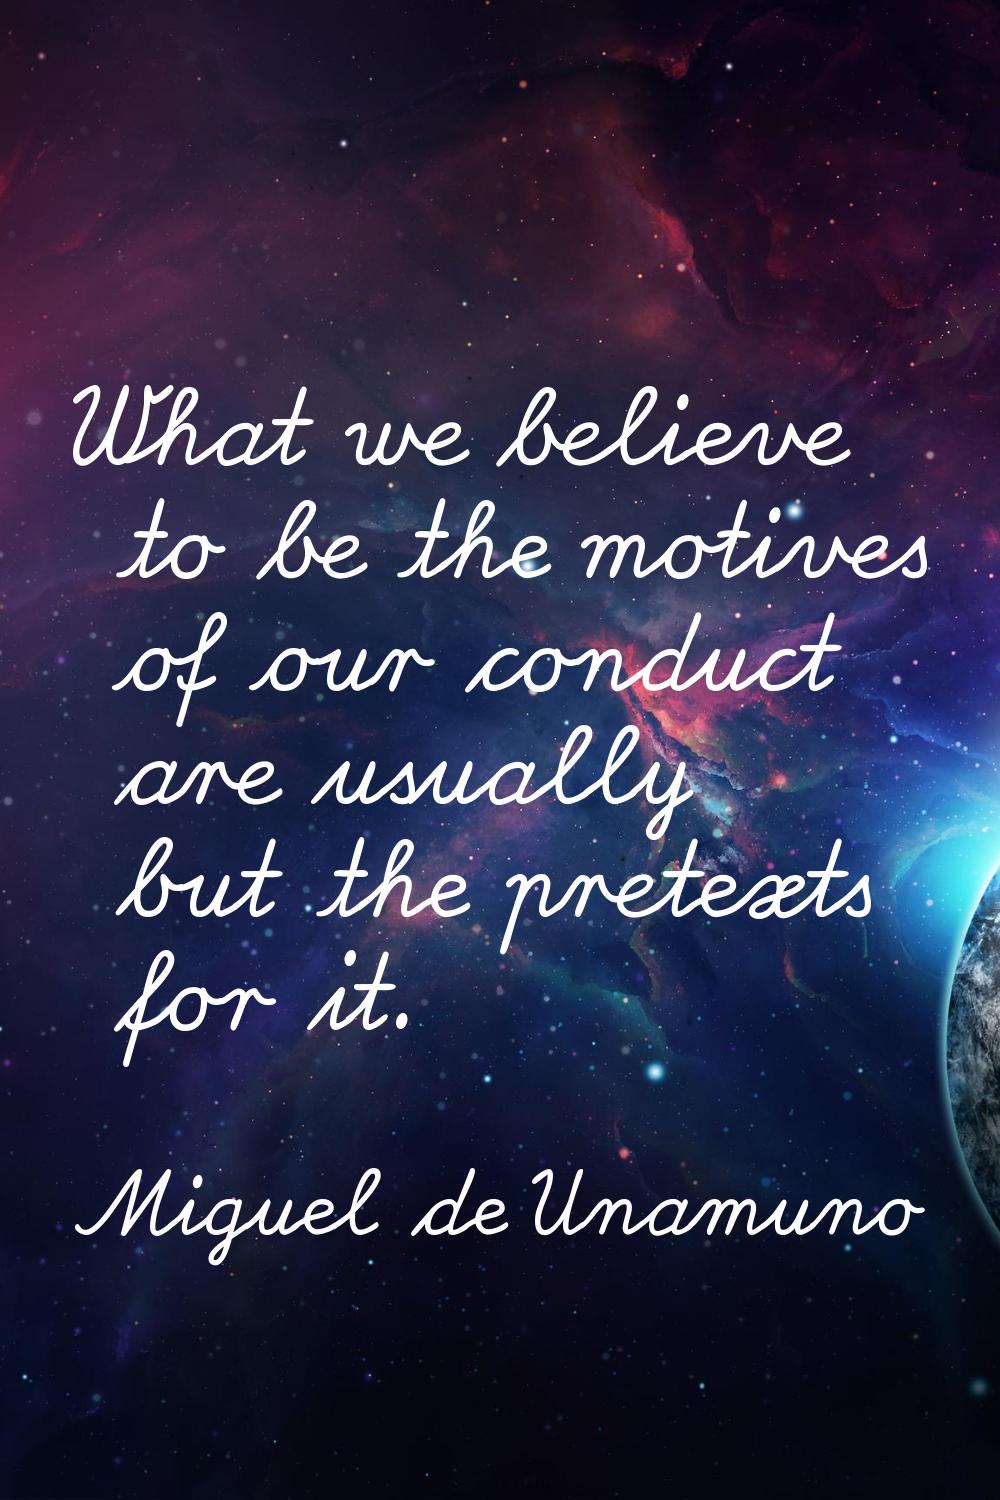 What we believe to be the motives of our conduct are usually but the pretexts for it.